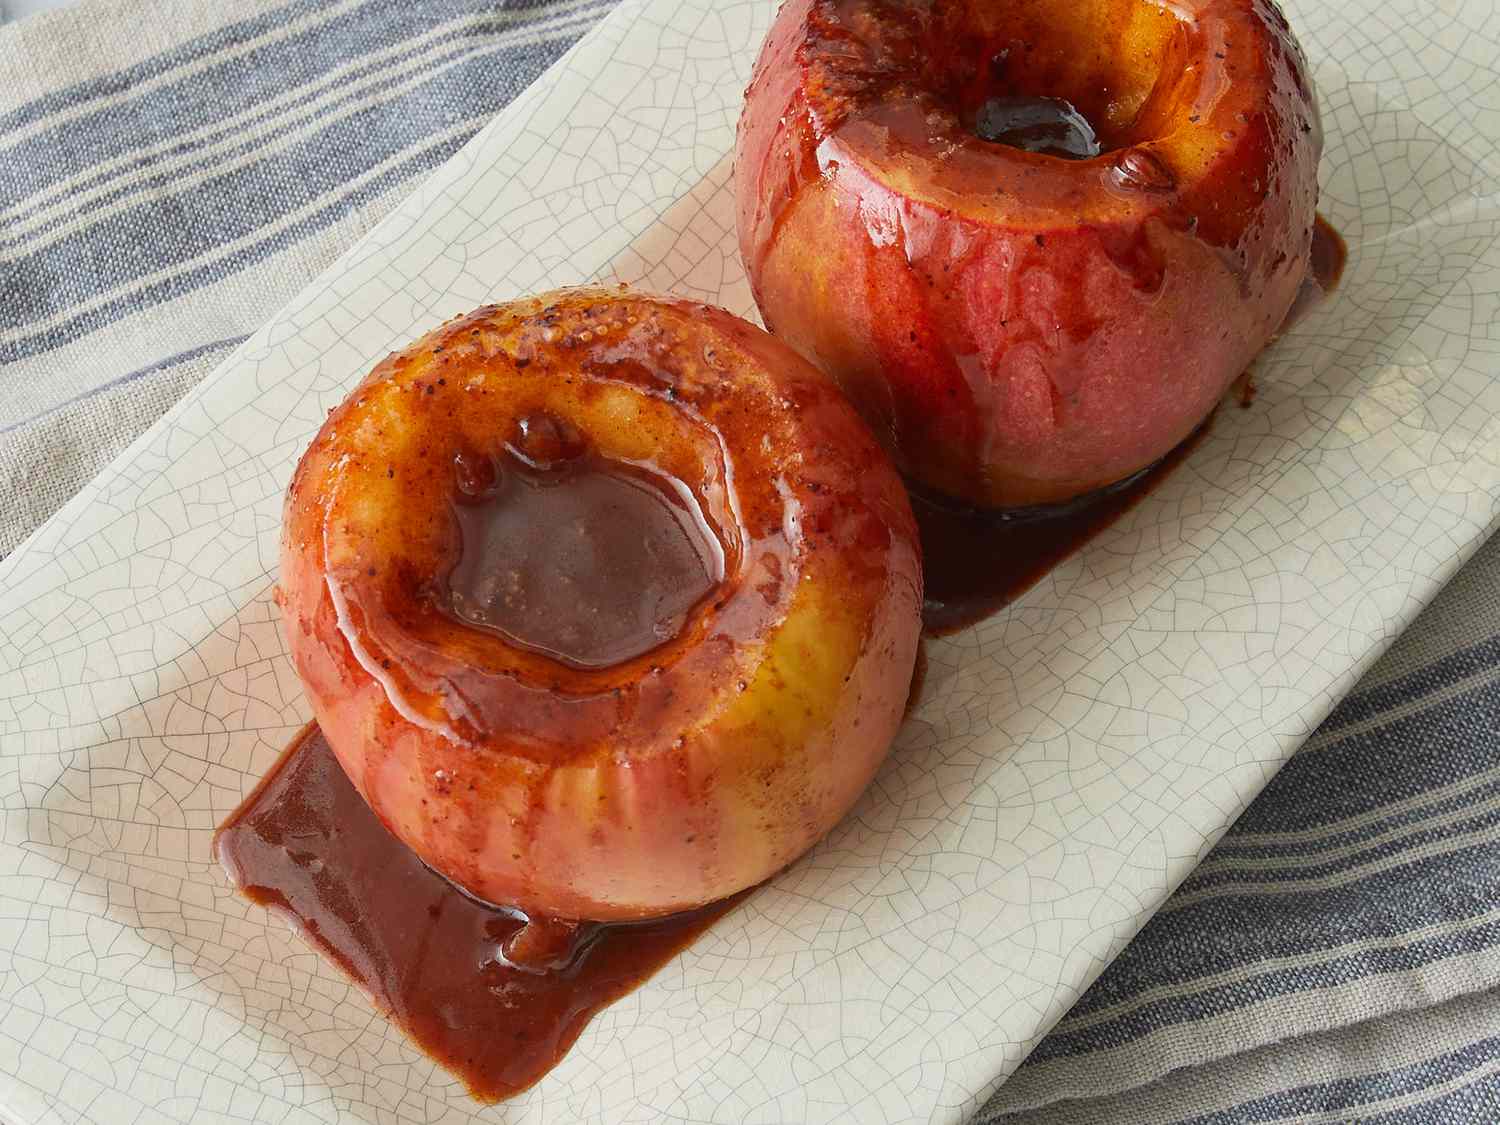 Looking at two microwave baked apples on a plate.